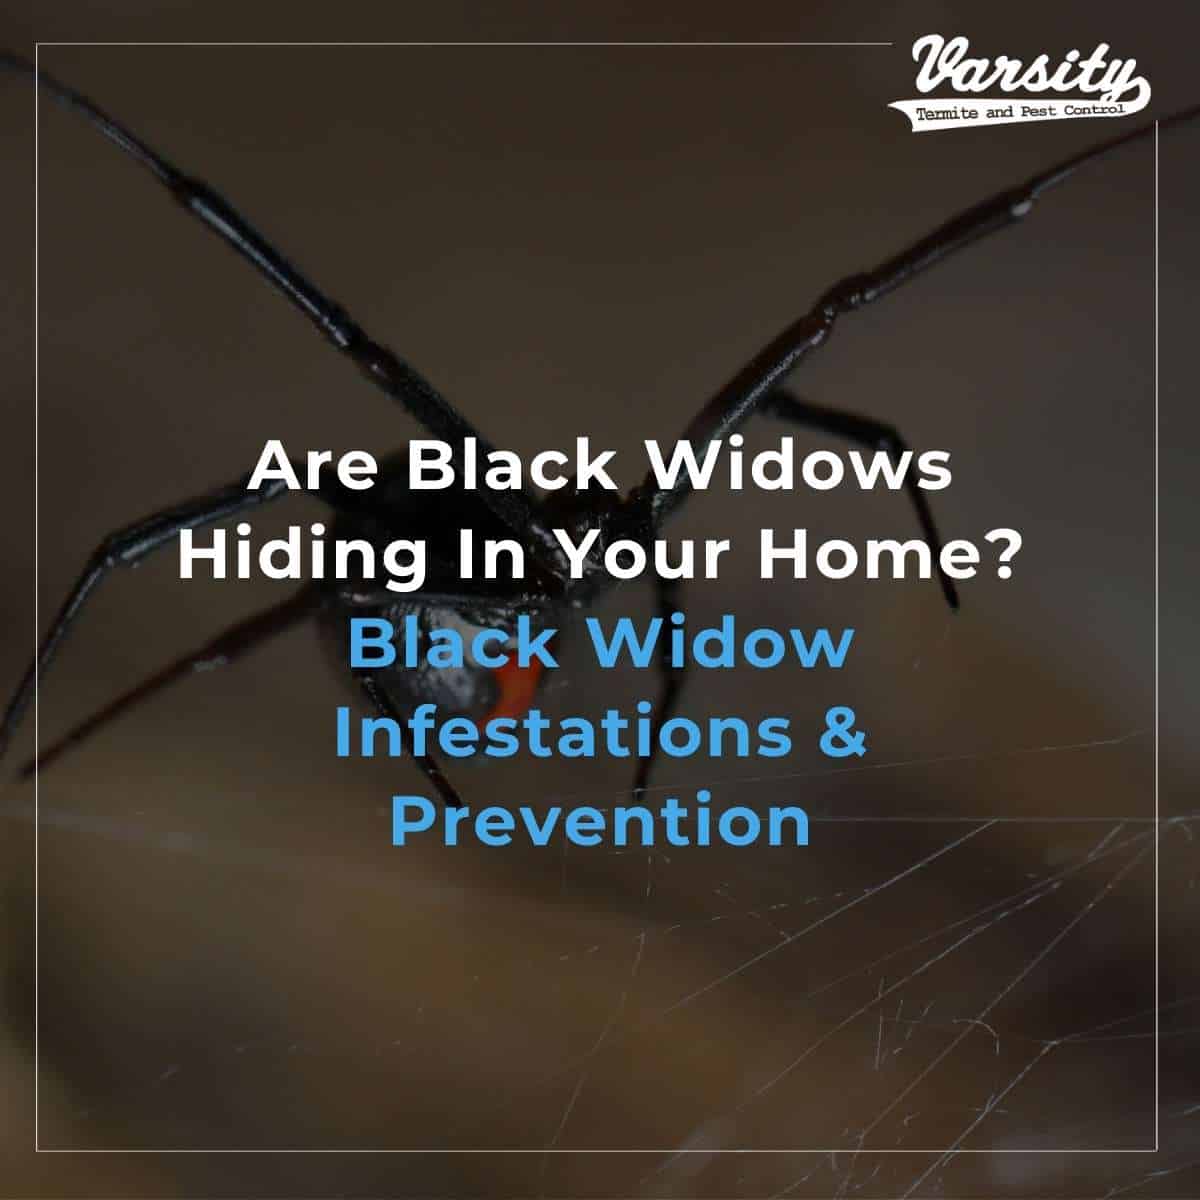 Are Black Widows Hiding In Your Home Black Widow Infestations & Prevention